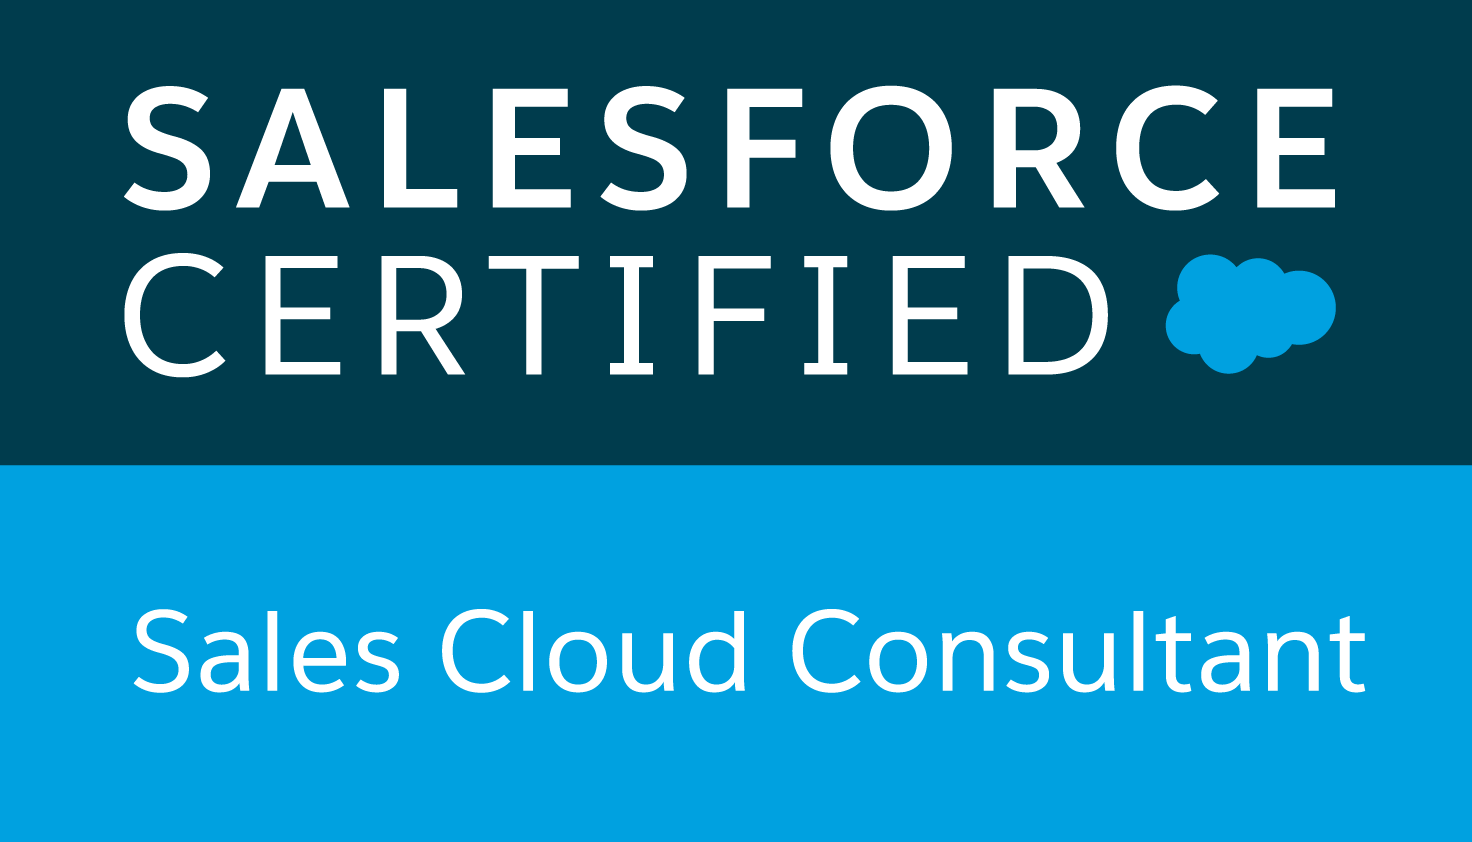 SALESFORCE CERTIFIED Sales Cloud Consultant ロゴ